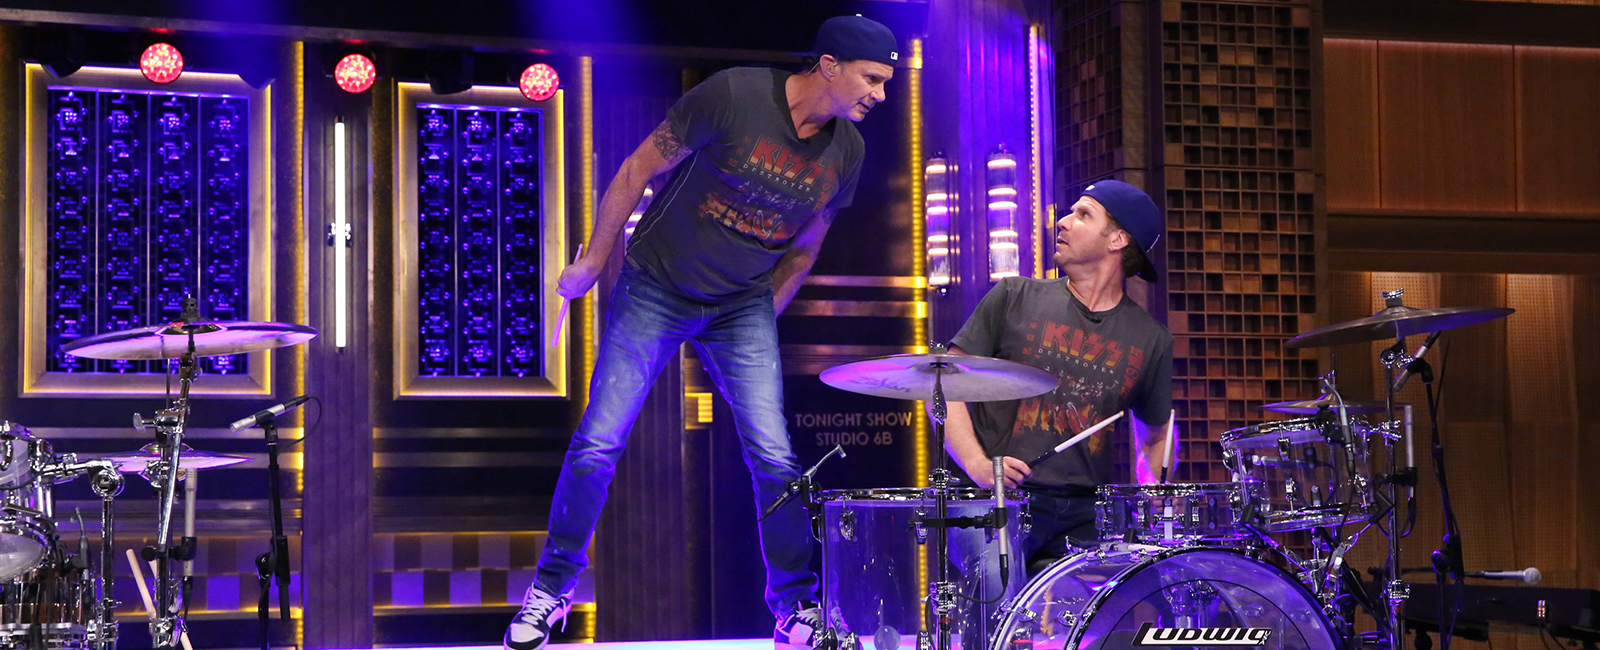 Will Ferrell and Chad Smith Drum-Off